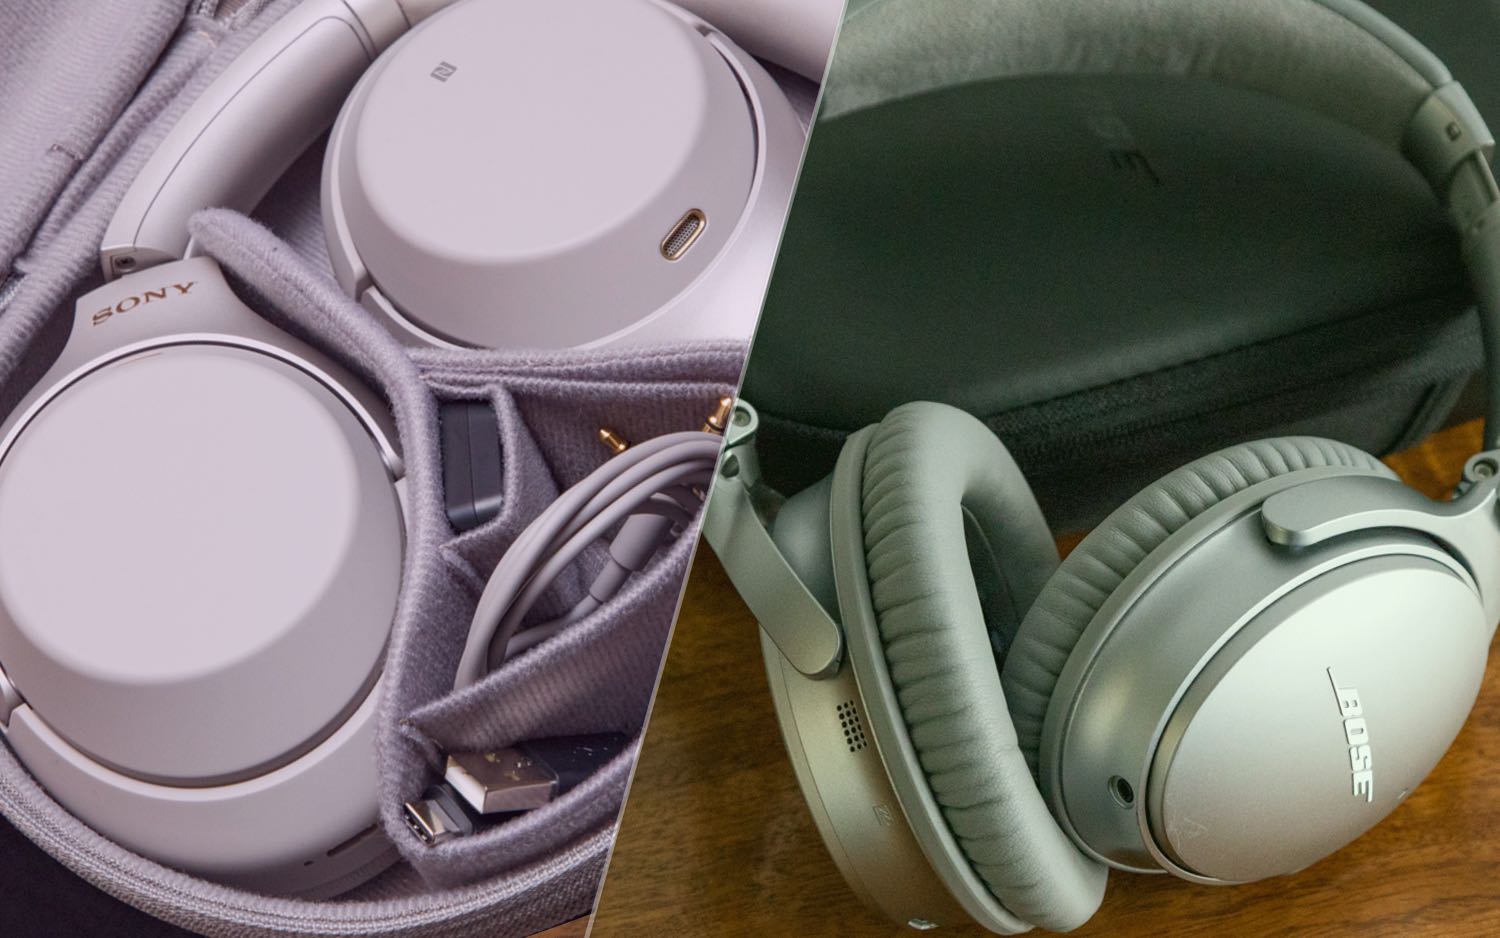 Bose quietcomfort 2. Sony WH-1000xm3. Sony WH-1000xm4 Silver. Bose QUIETCOMFORT 35 II. Sony WF-1000xm2.